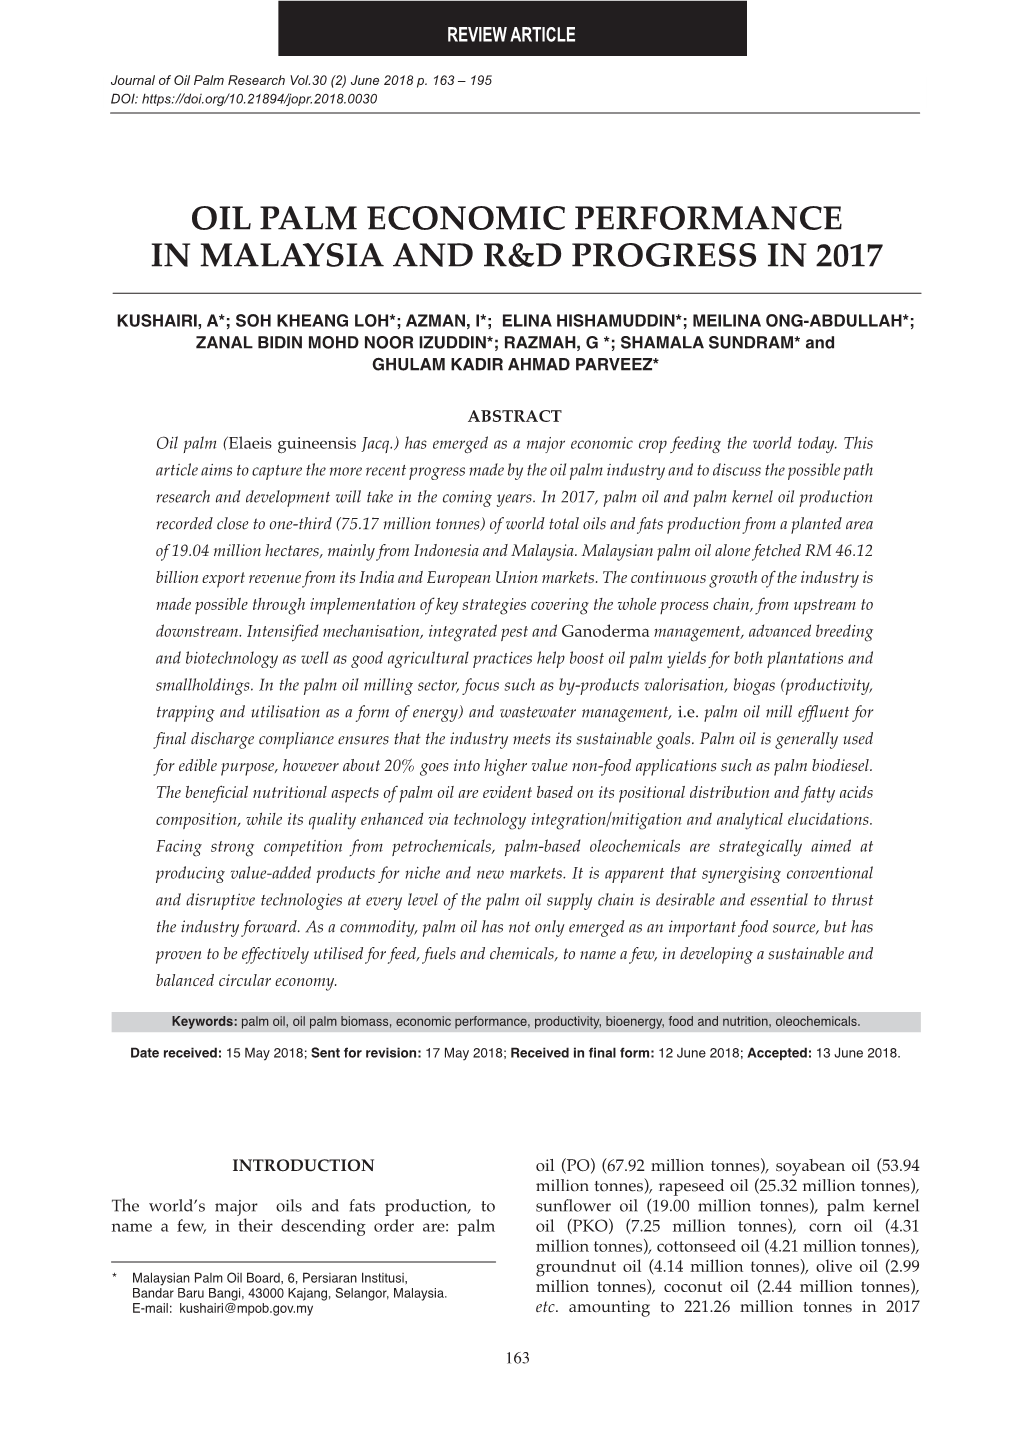 Oil Palm Economic Performance in Malaysia and R&D Progress in 2017